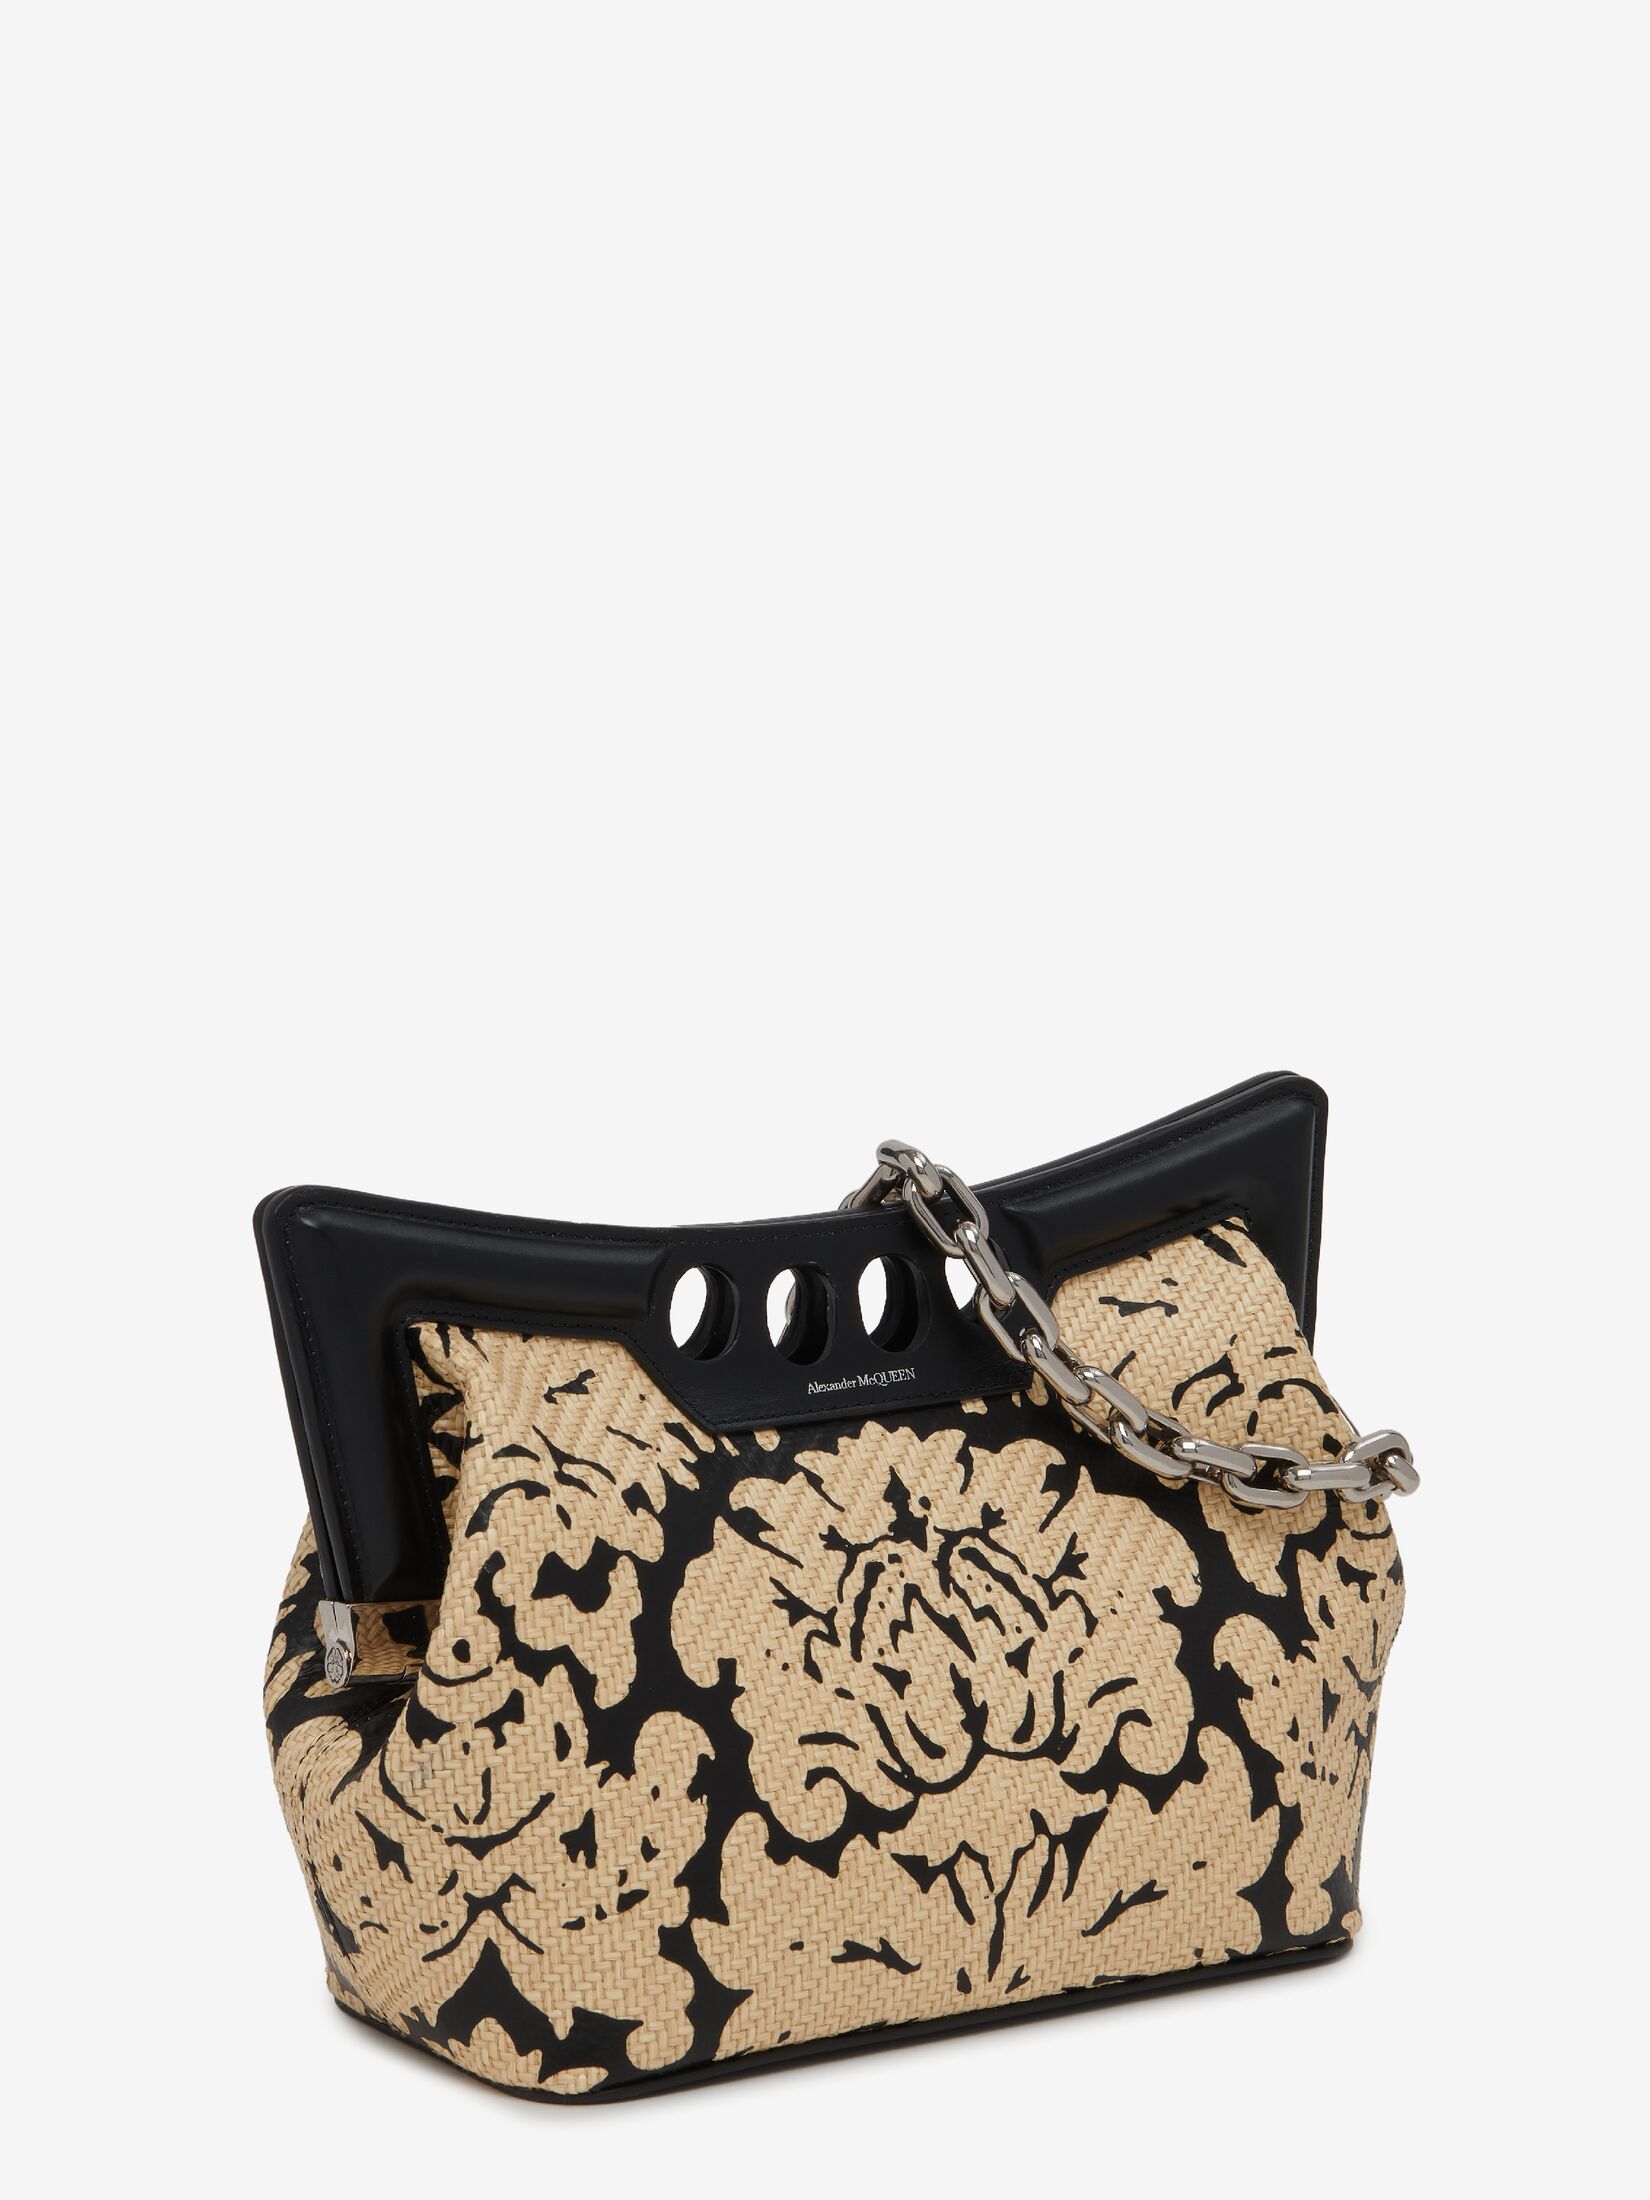 Alexander McQueen Printed Leather Clutch - White Clutches, Handbags -  ALE181534 | The RealReal